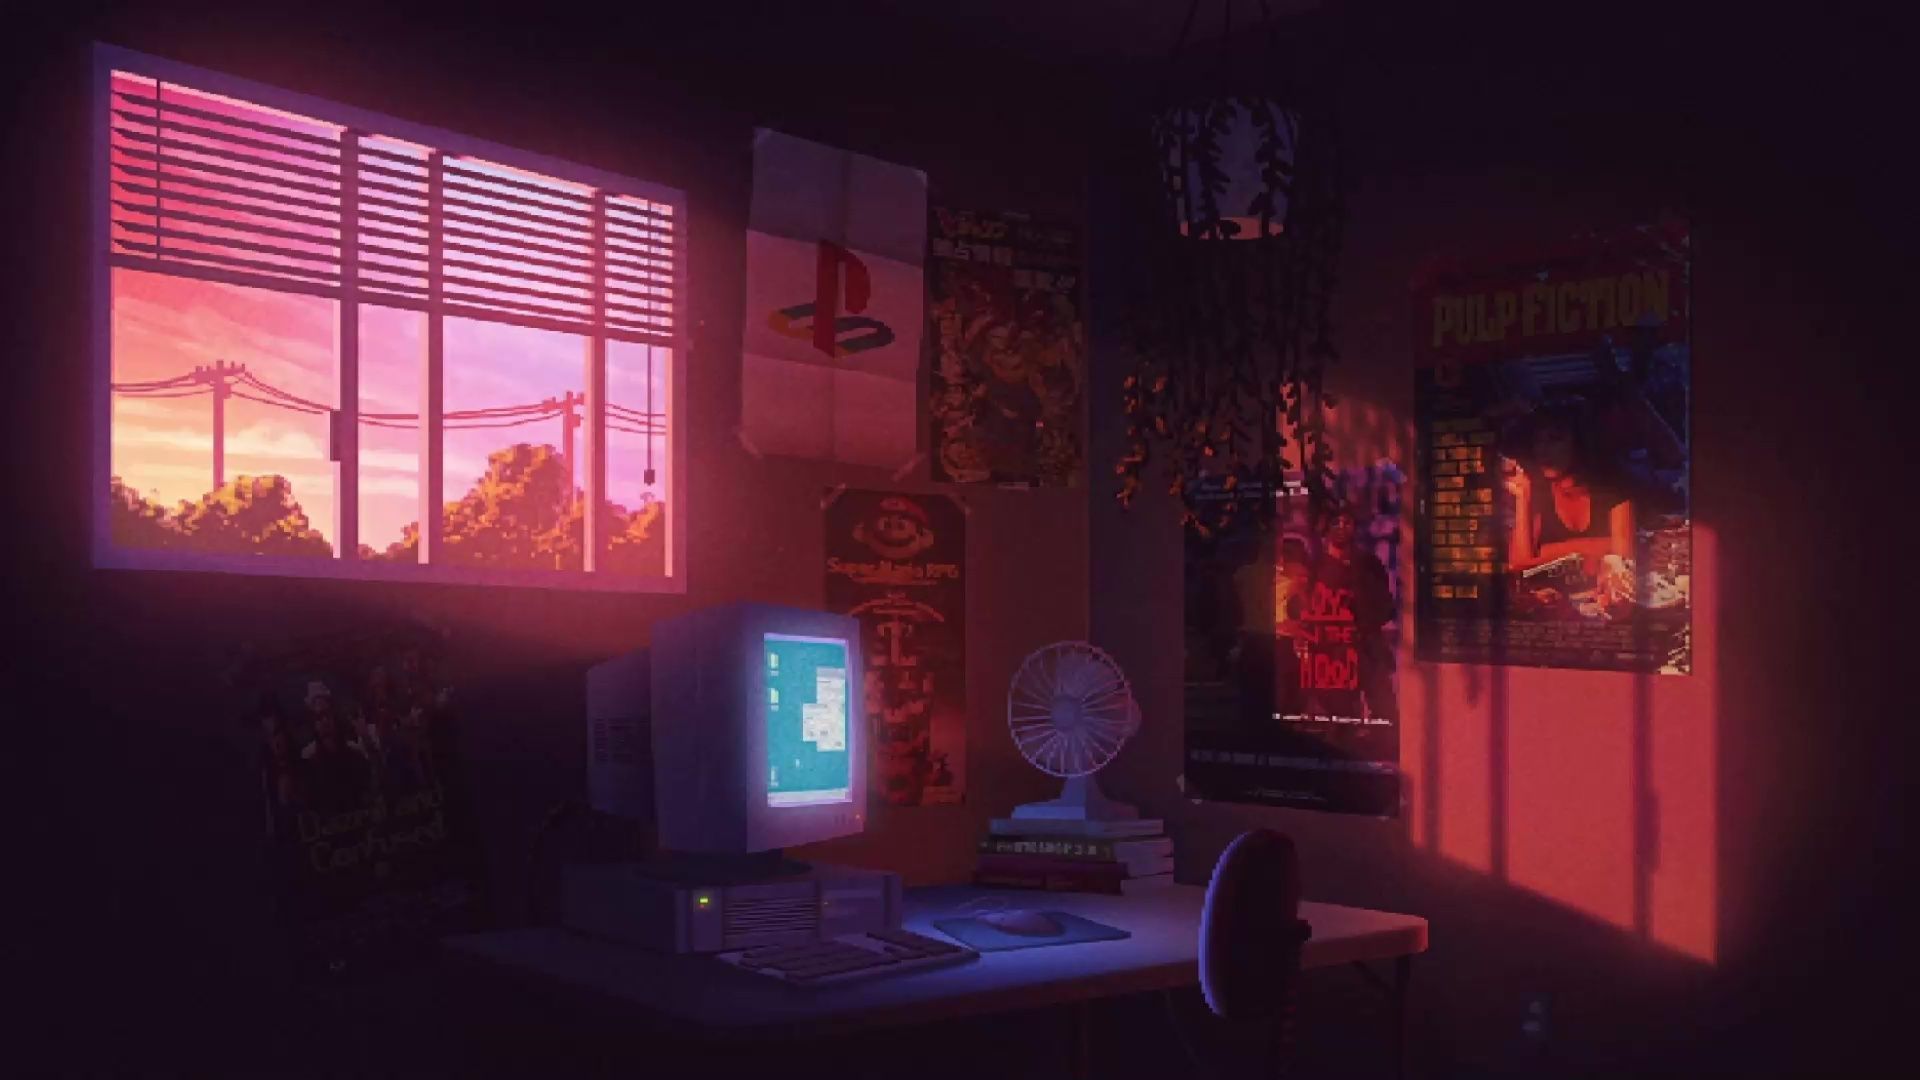 A dark room with a computer and posters on the wall - 90s, Windows 10, technology